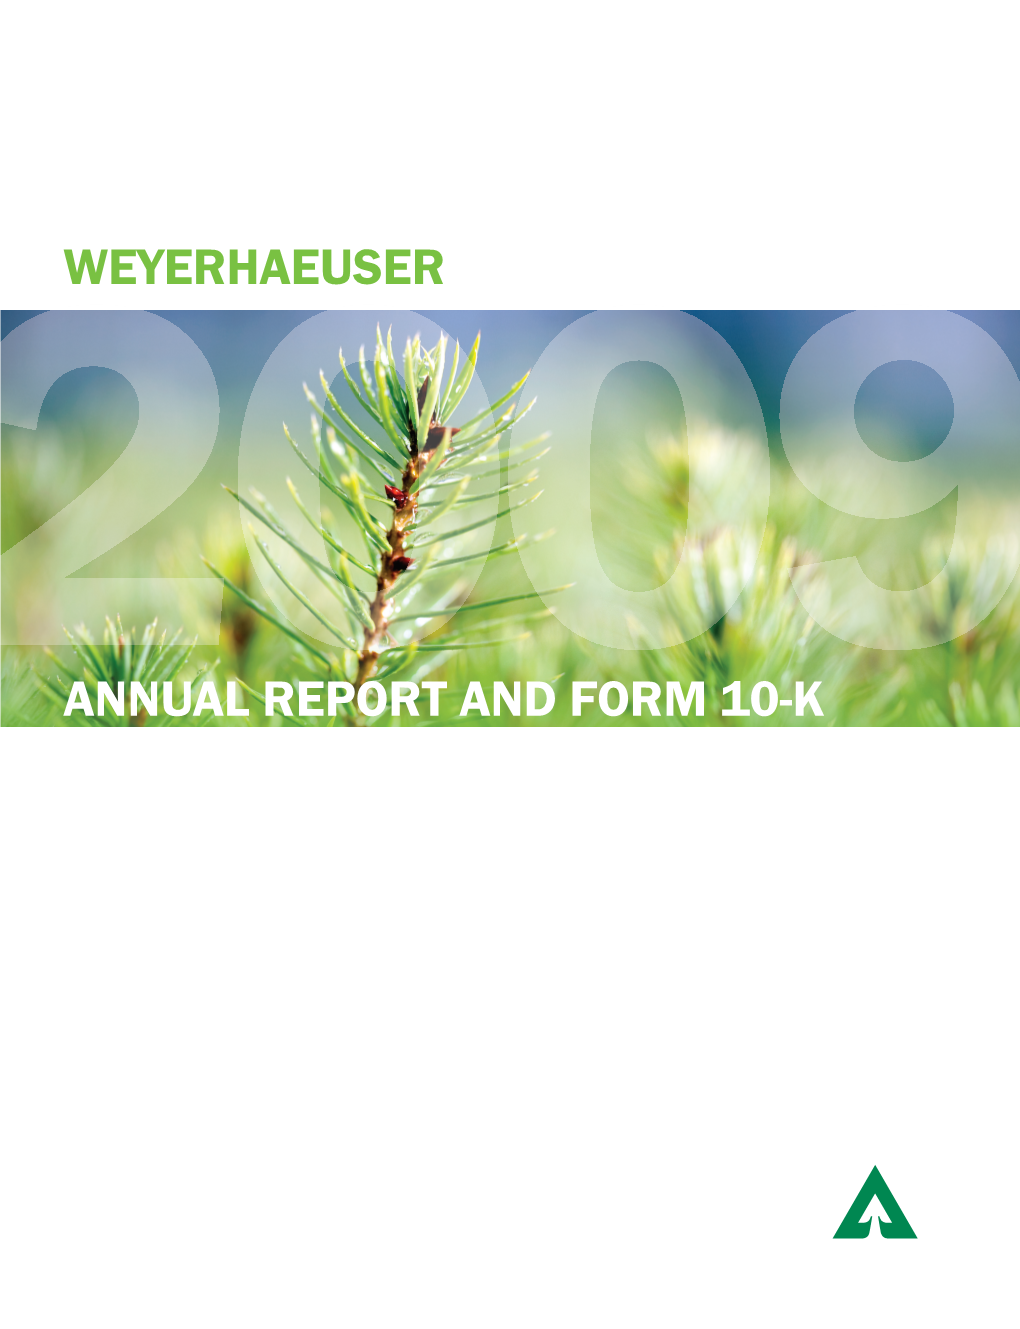 Weyerhaeuser Annual Report and Form 10-K